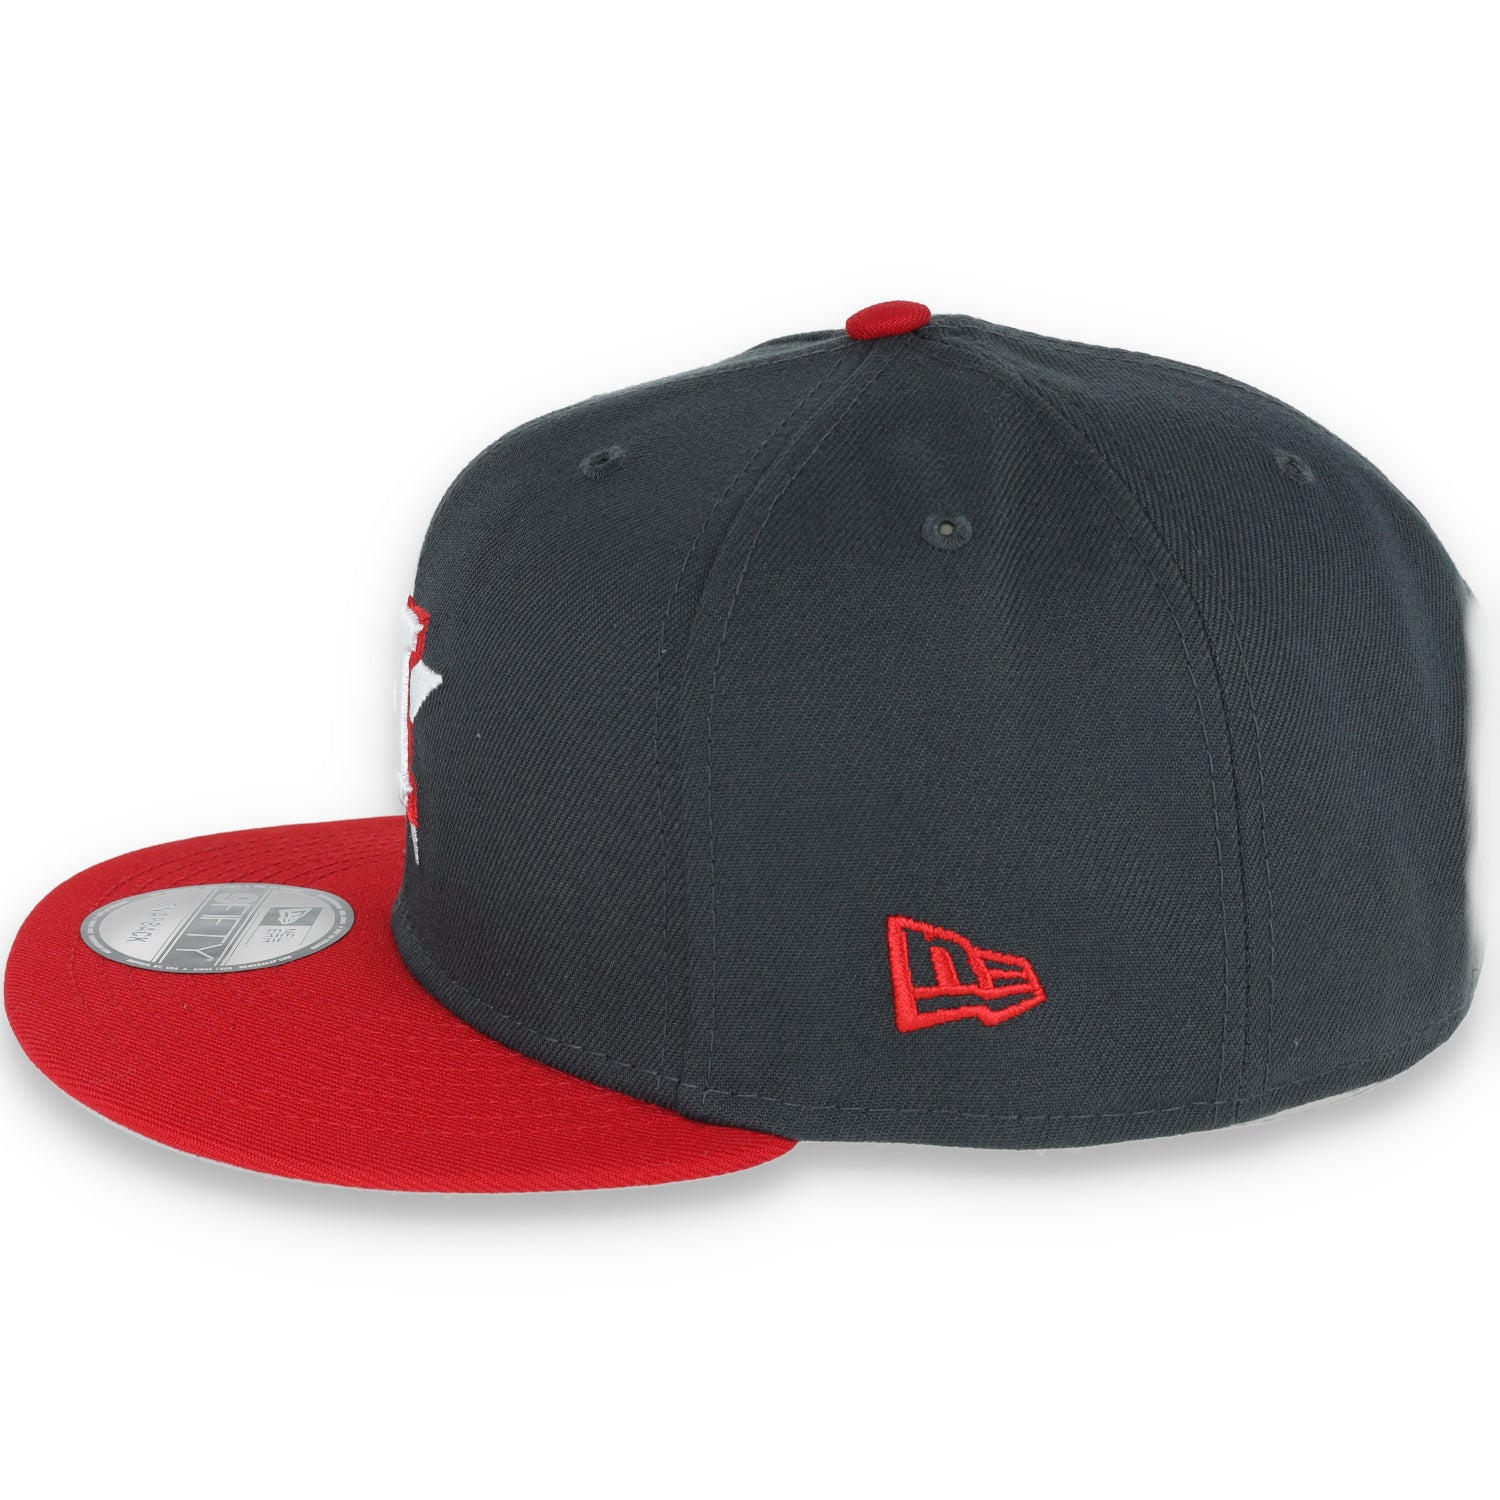 New Era Houston Astros 2-Tone Color Pack 9FIFTY Snapback Hat-Grey/Scarlet